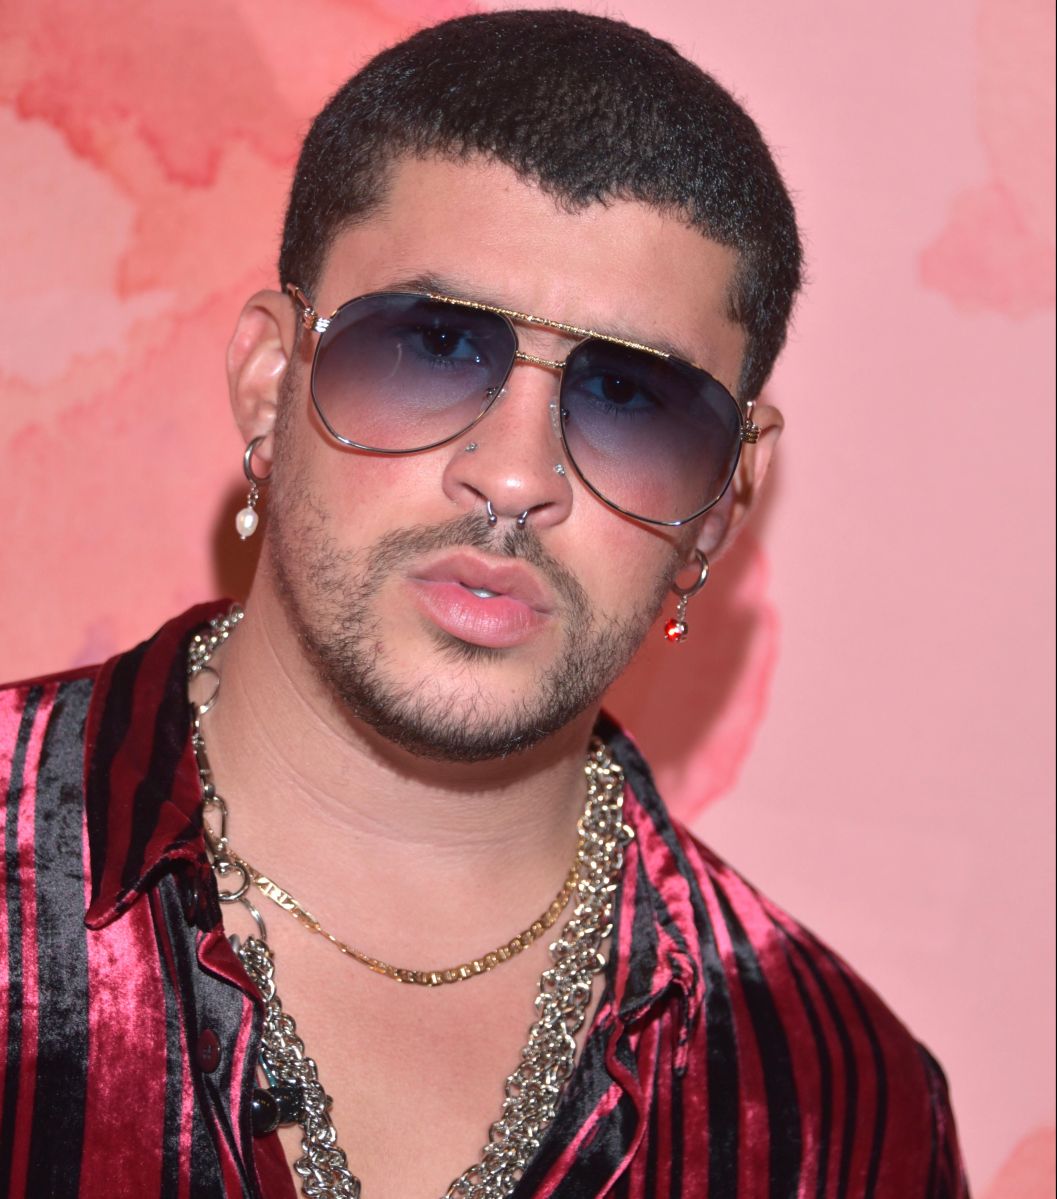 Bad Bunny arrives for the first time by the hand of his girlfriend at the 2021 Billboard Latin Music Awards